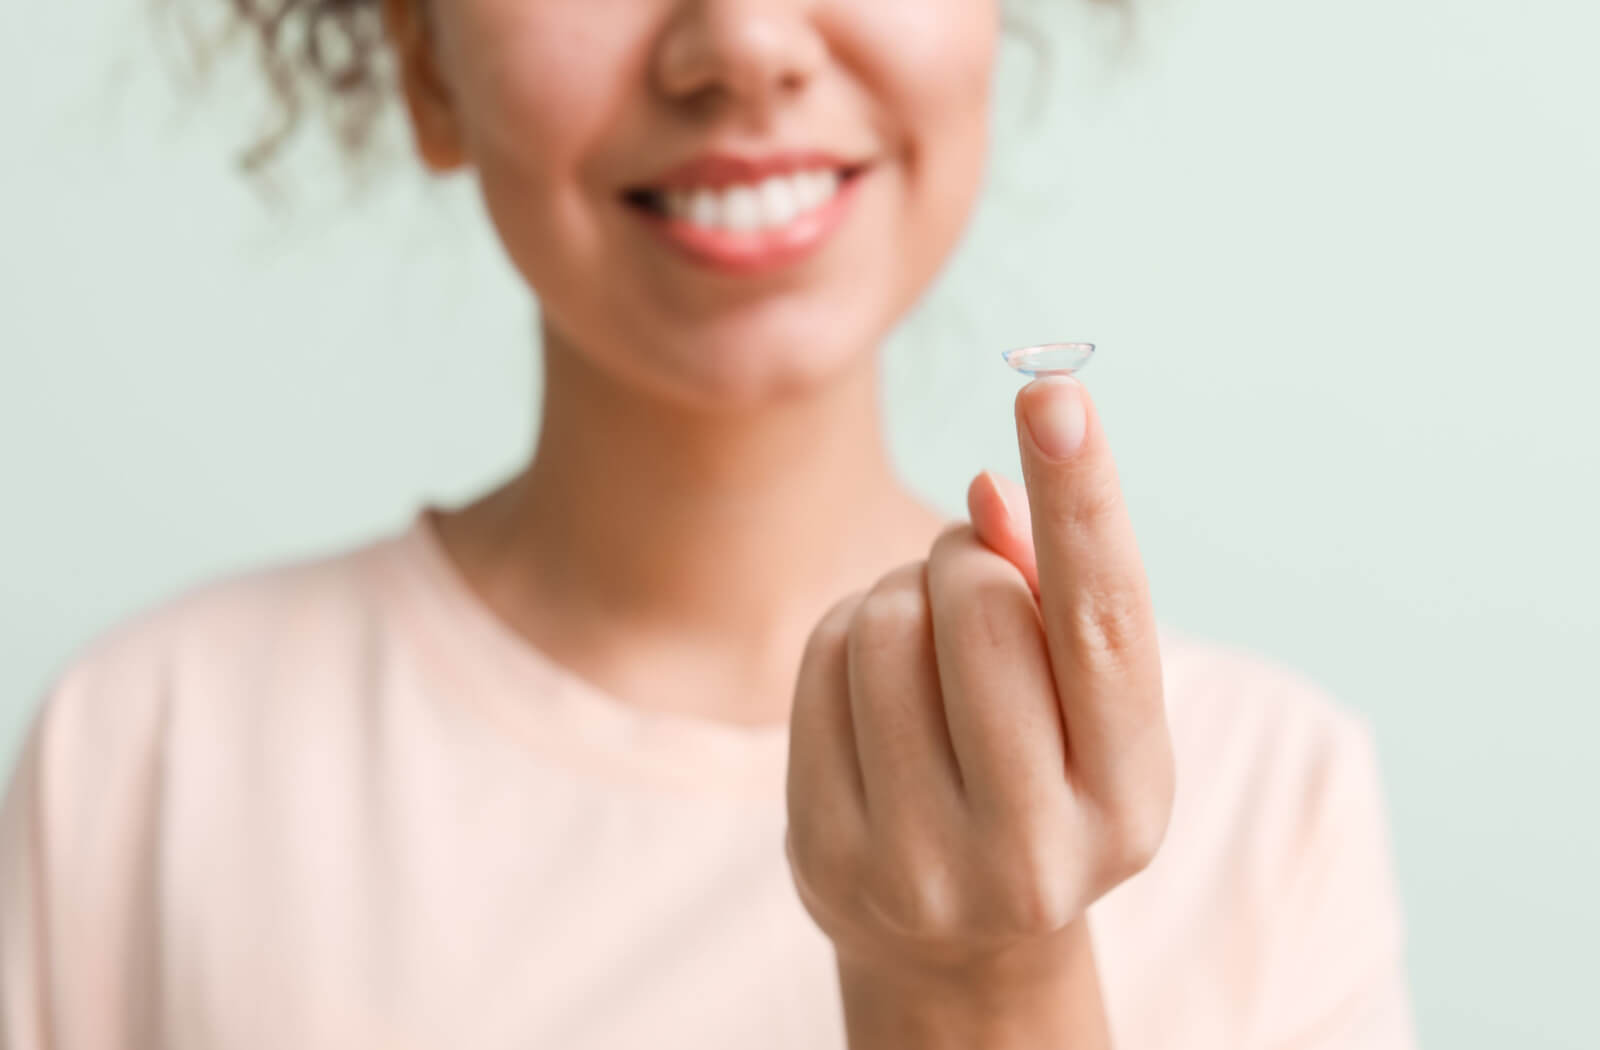 a woman holds a contact lens on her finger that fits perfectly because she had a contact lens fitting